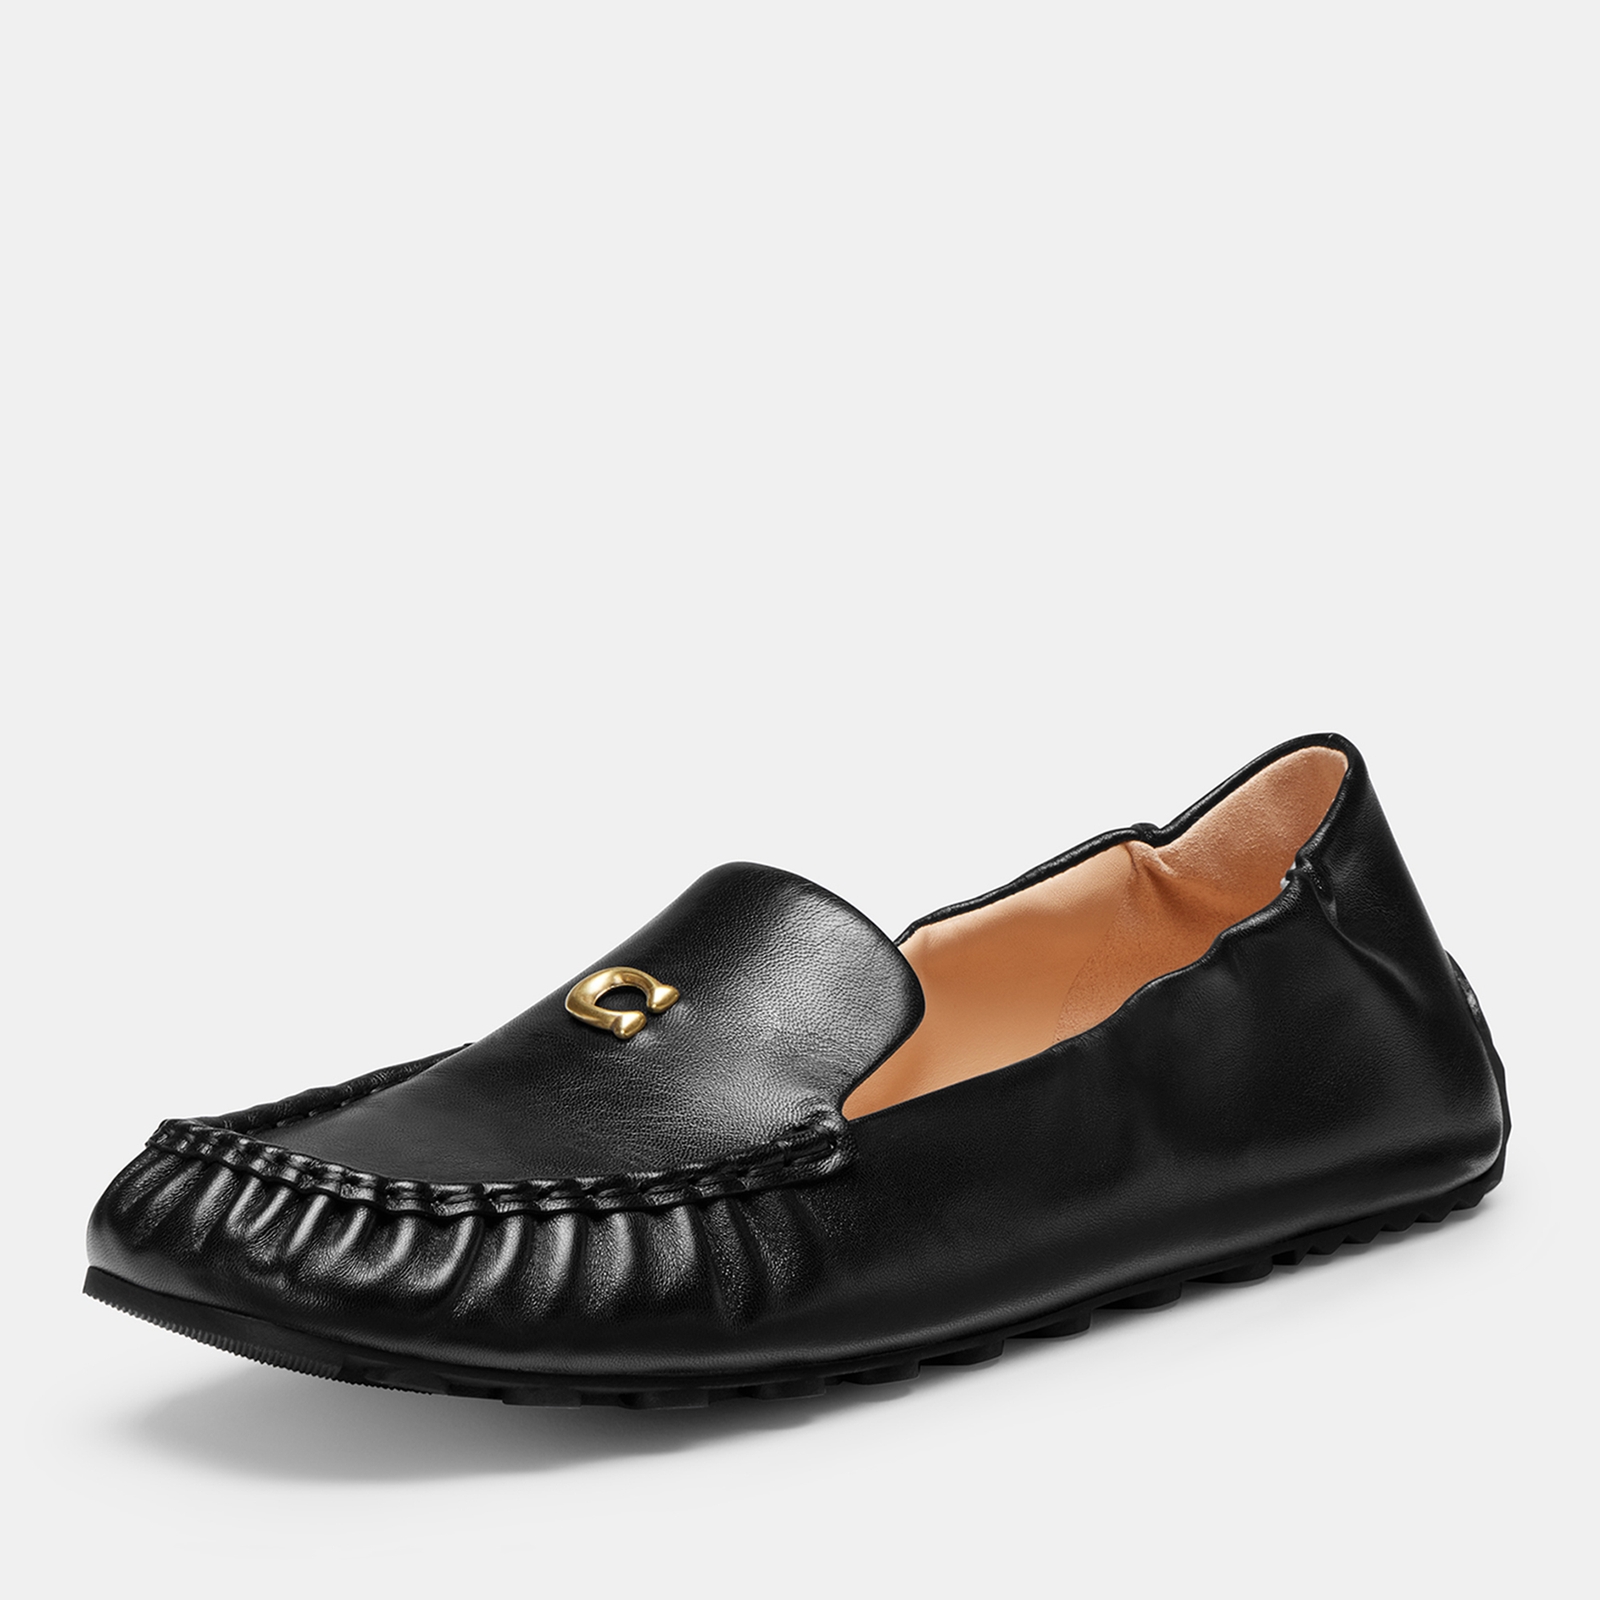 Coach Women’s Ronnie Leather Loafers